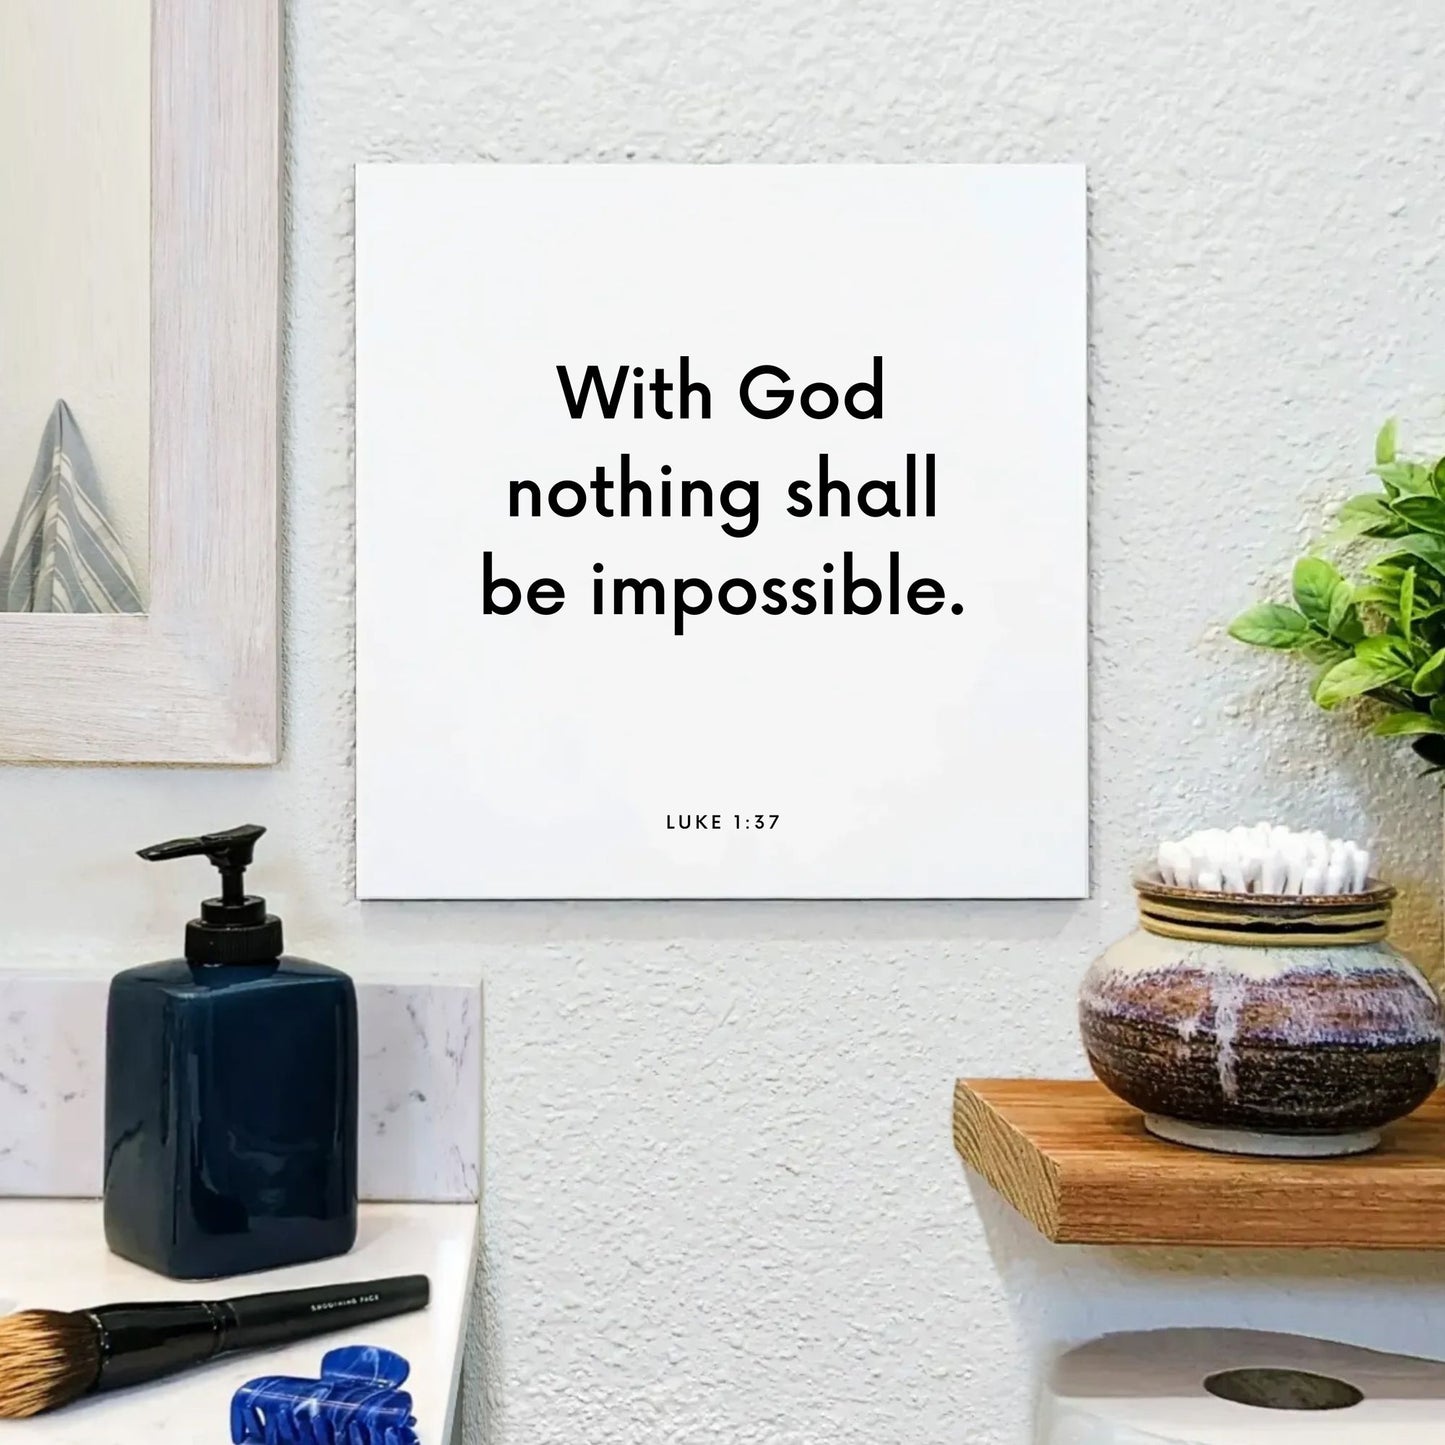 Bathroom mouting of the scripture tile for Luke 1:37 - "With God nothing shall be impossible"